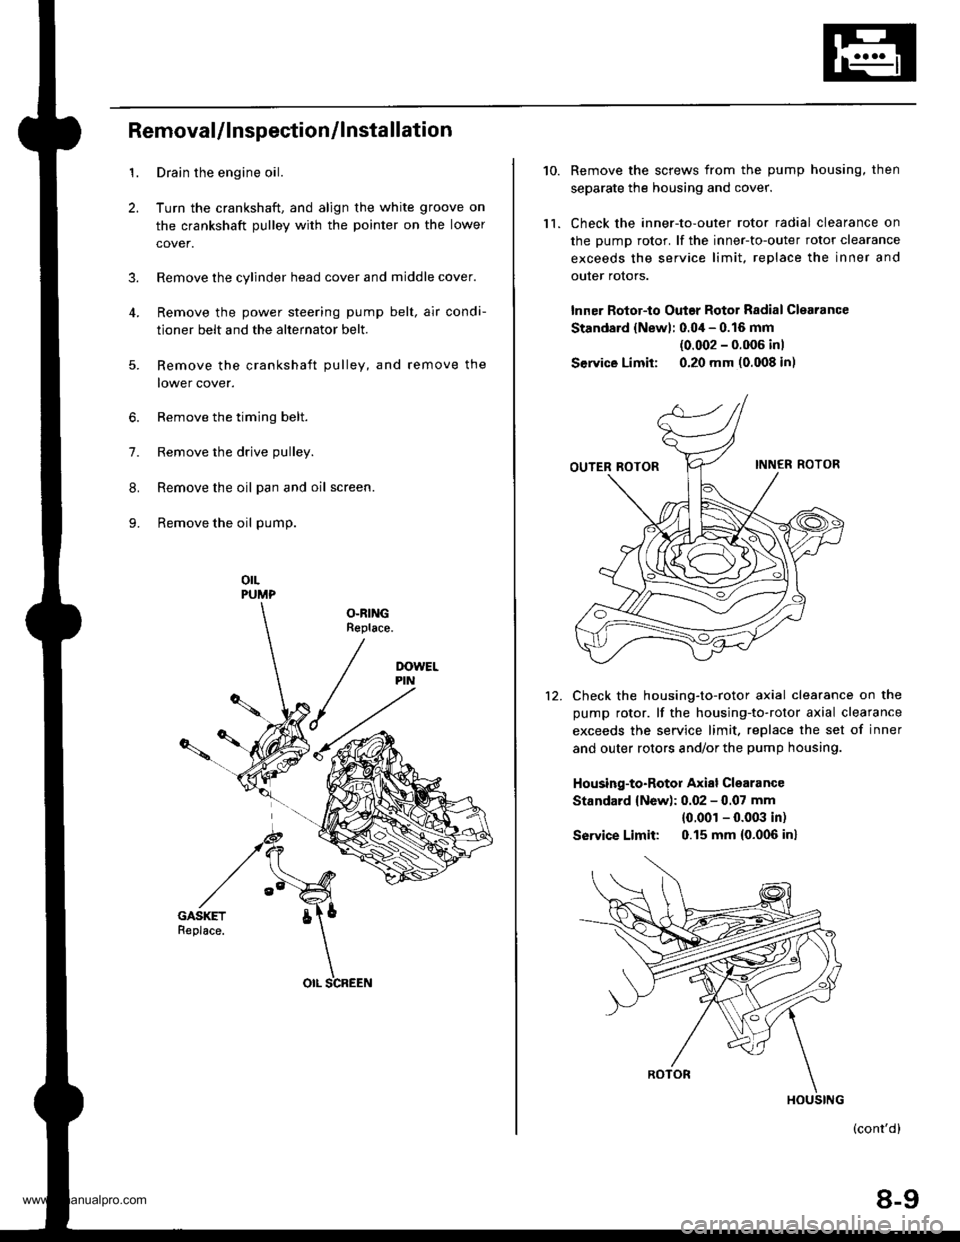 HONDA CR-V 1998 RD1-RD3 / 1.G Owners Manual 
1.
2.
3.
RemovaUlnspection/lnstallation
Drain the engine oil.
Turn the crankshaft, and align the white groove on
the crankshaft pulley with the pointer on the lower
cover.
Remove the cylinder head co